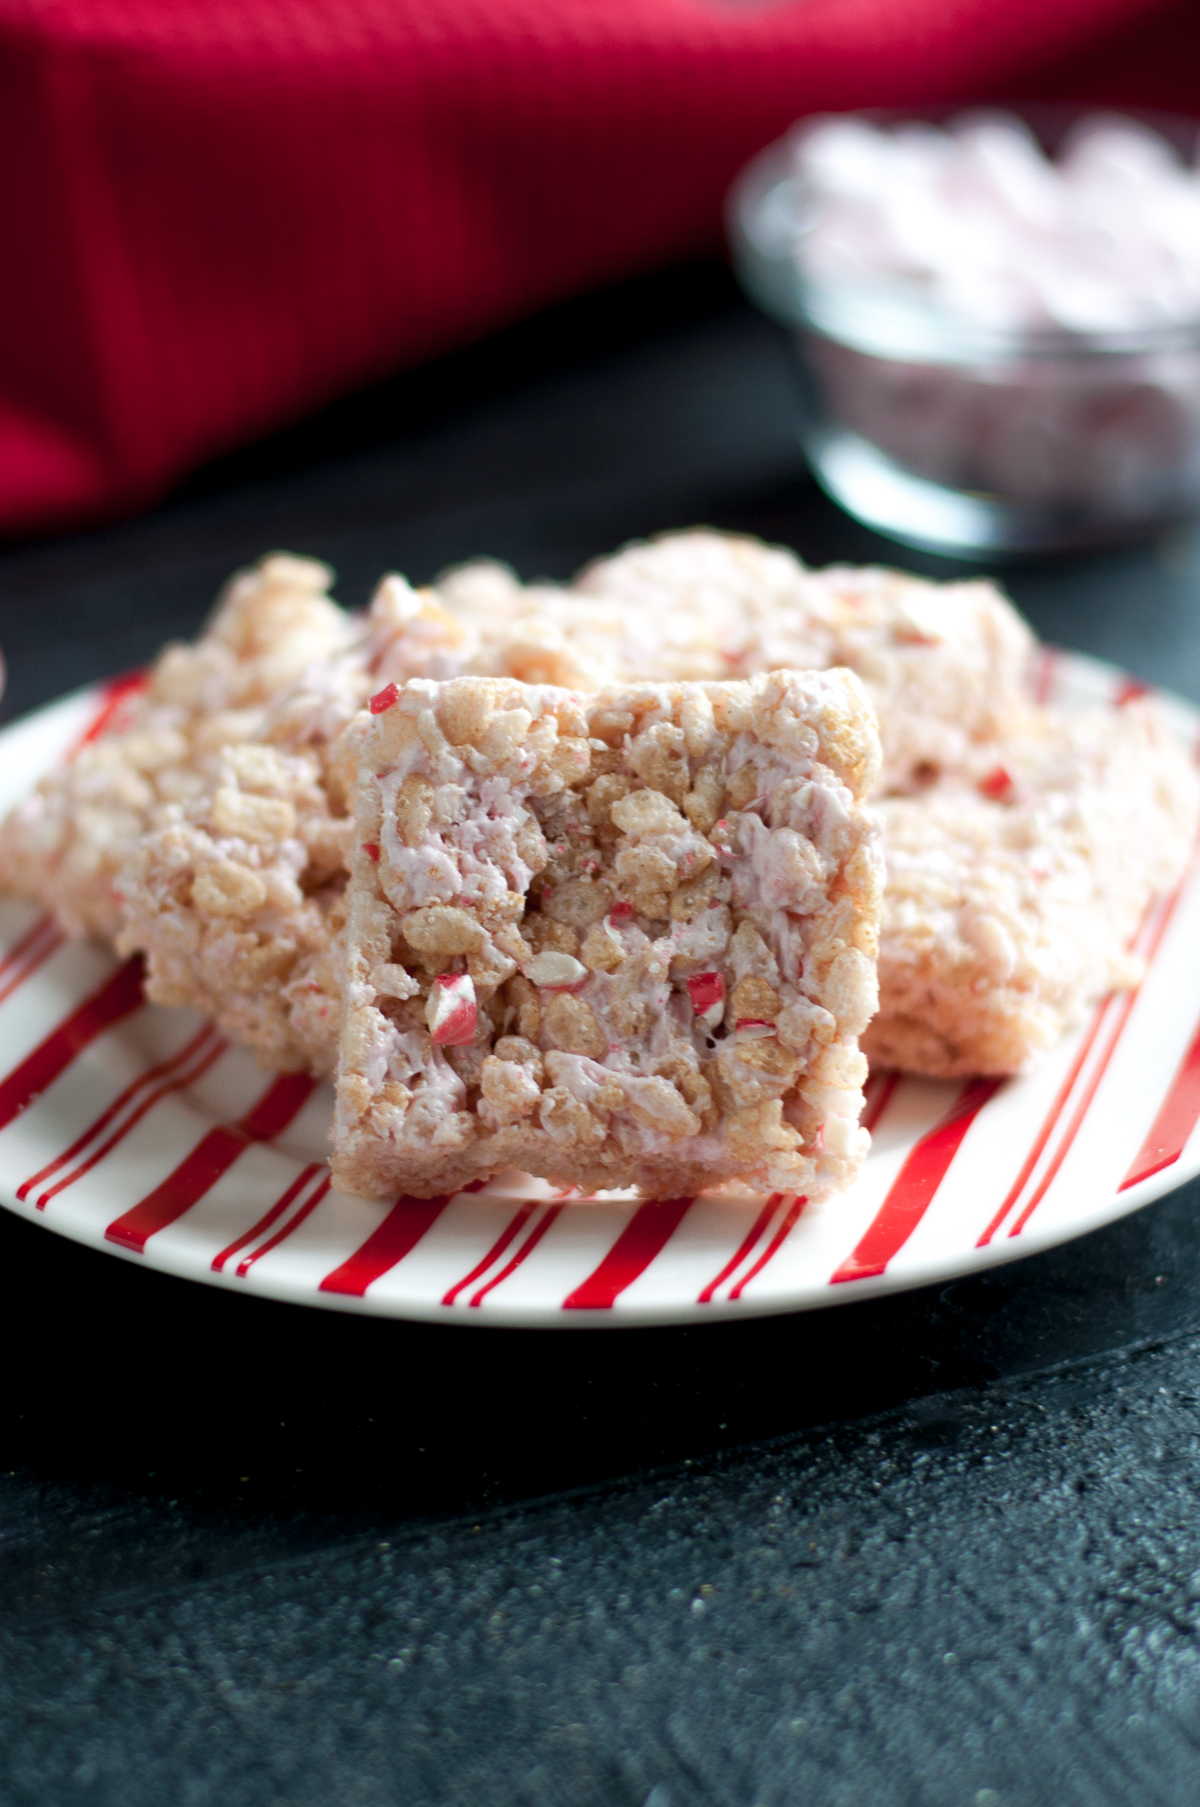 Peppermint rice krispies treats on a red striped plate.